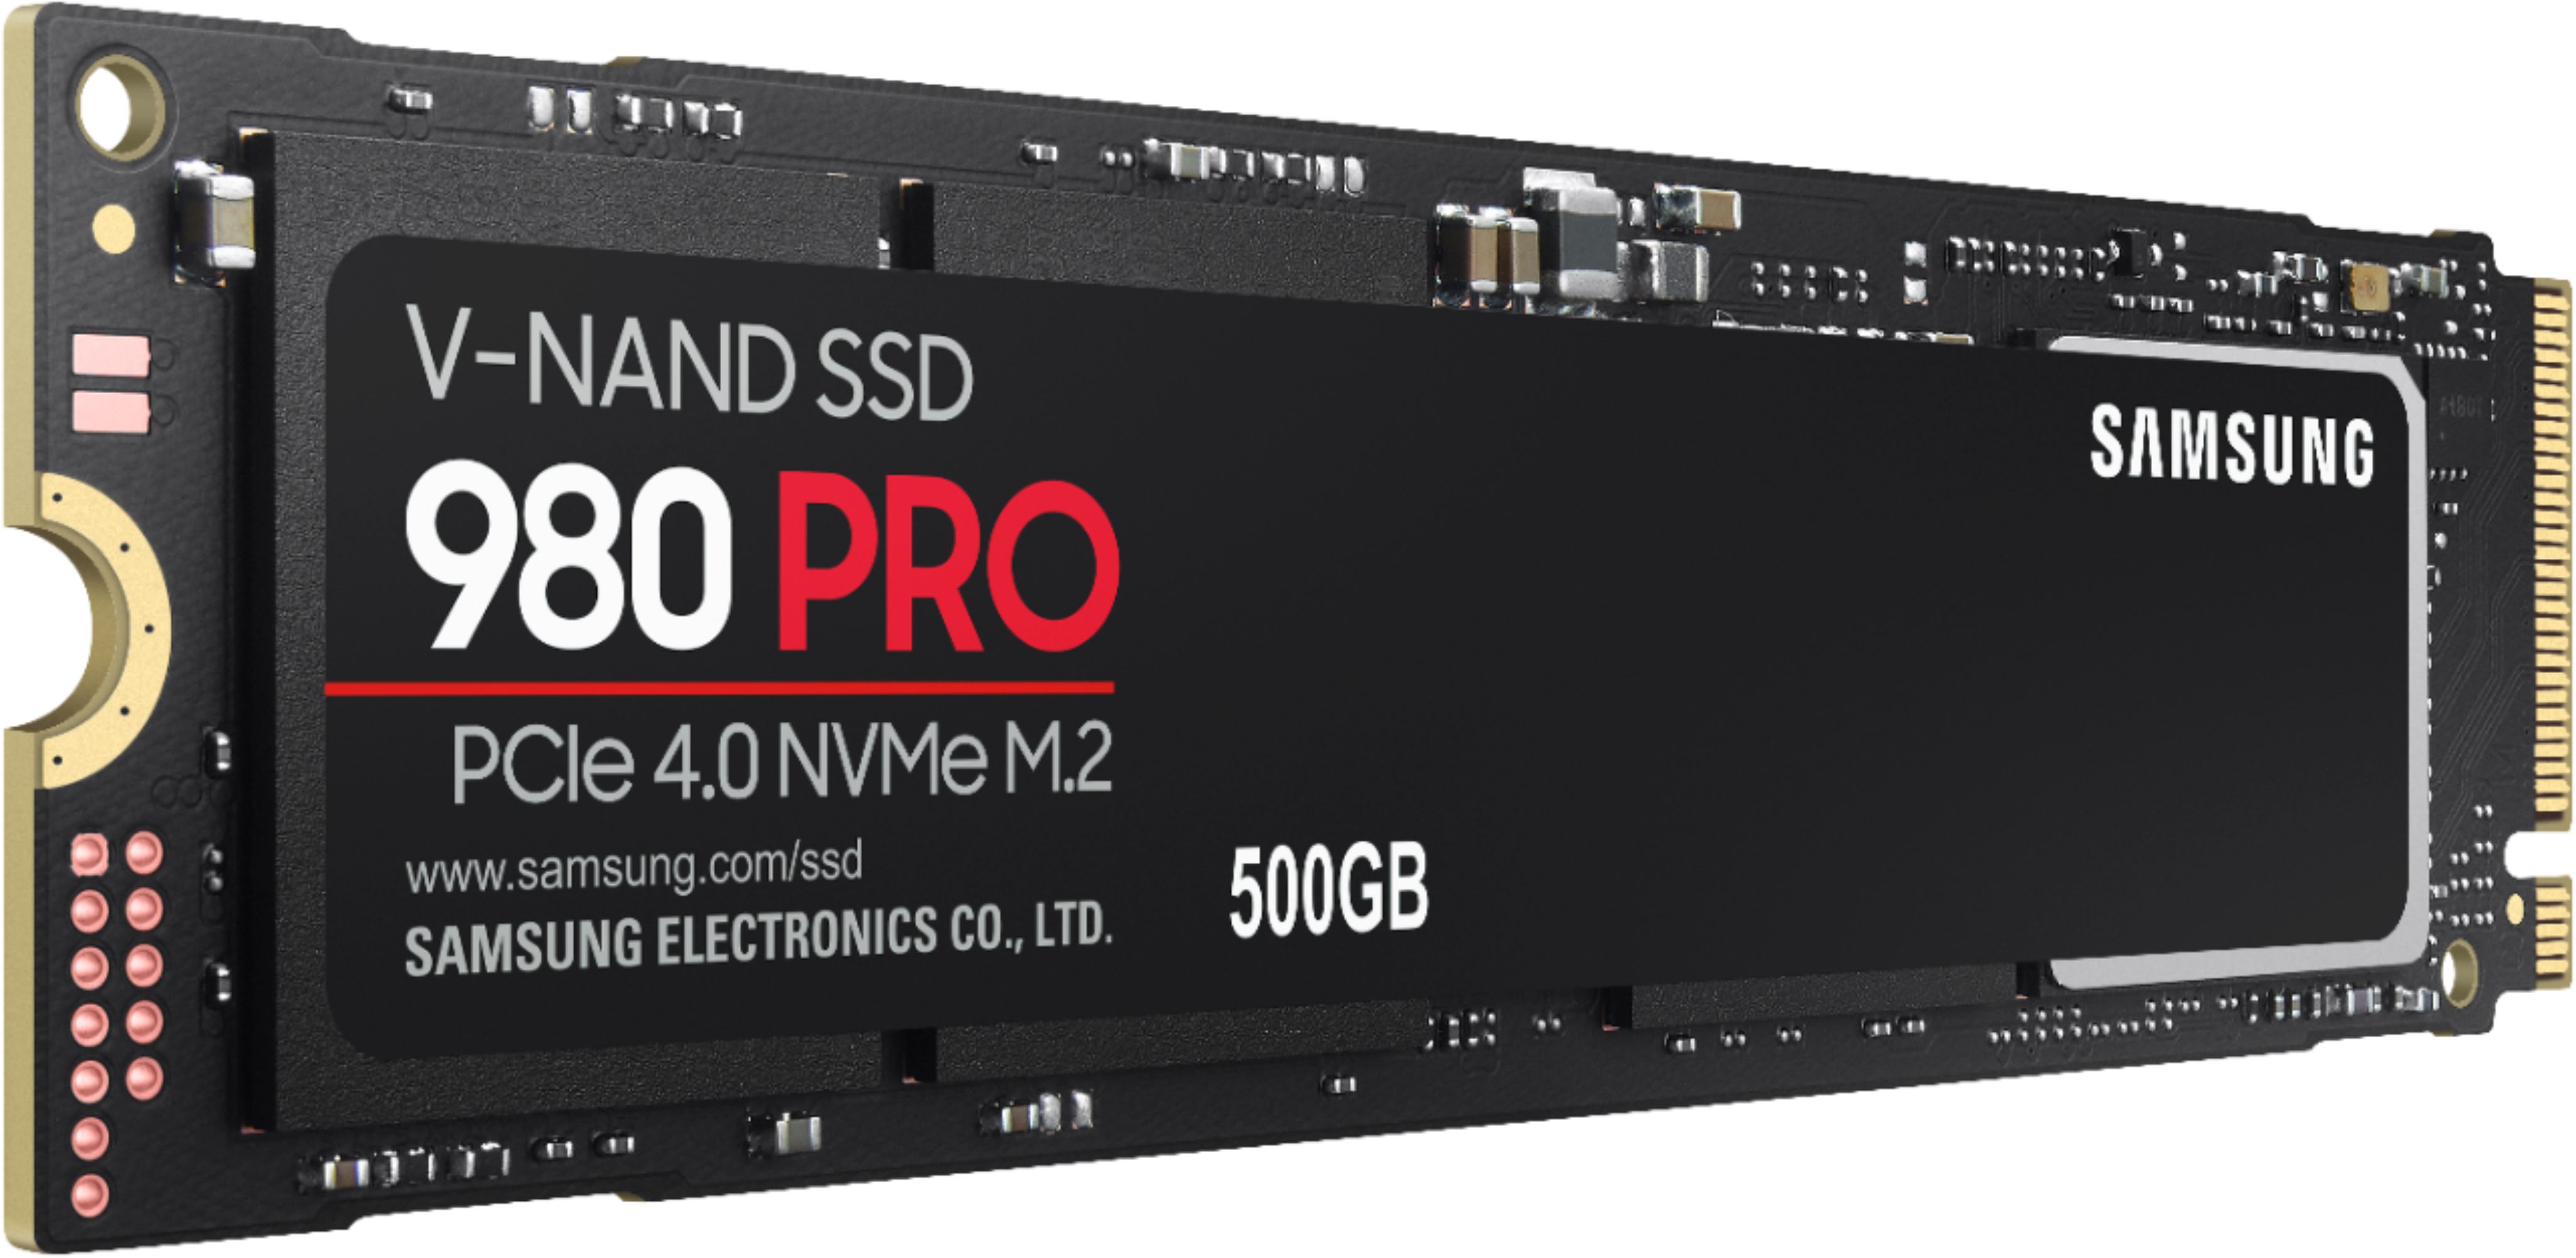 Samsung - 980 PRO 500GB PCIe Gen 4 x4 NVMe Gaming Internal Solid State Drive